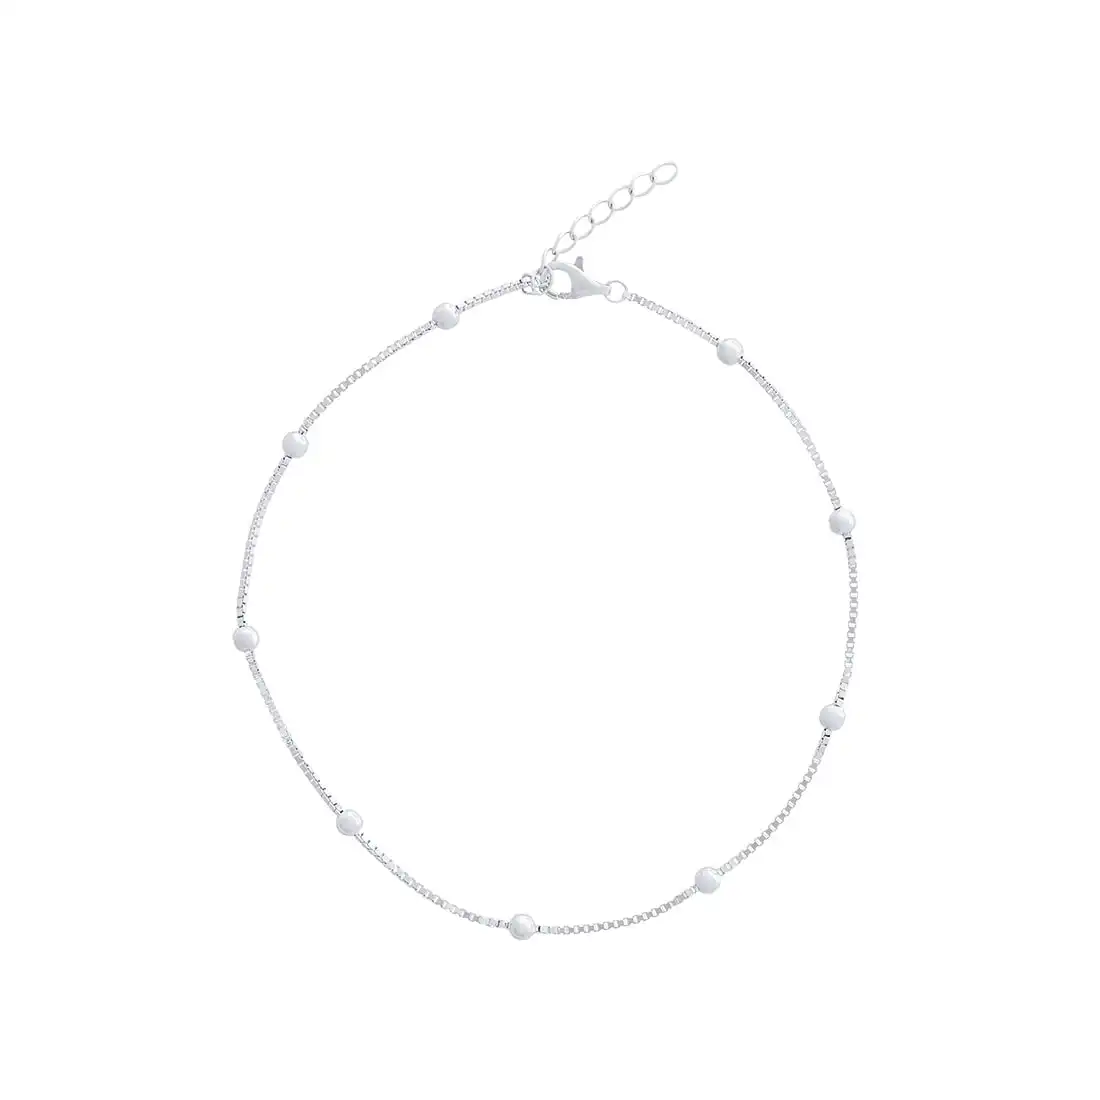 25cm Sterling Silver Ball Station Box Chain Anklet